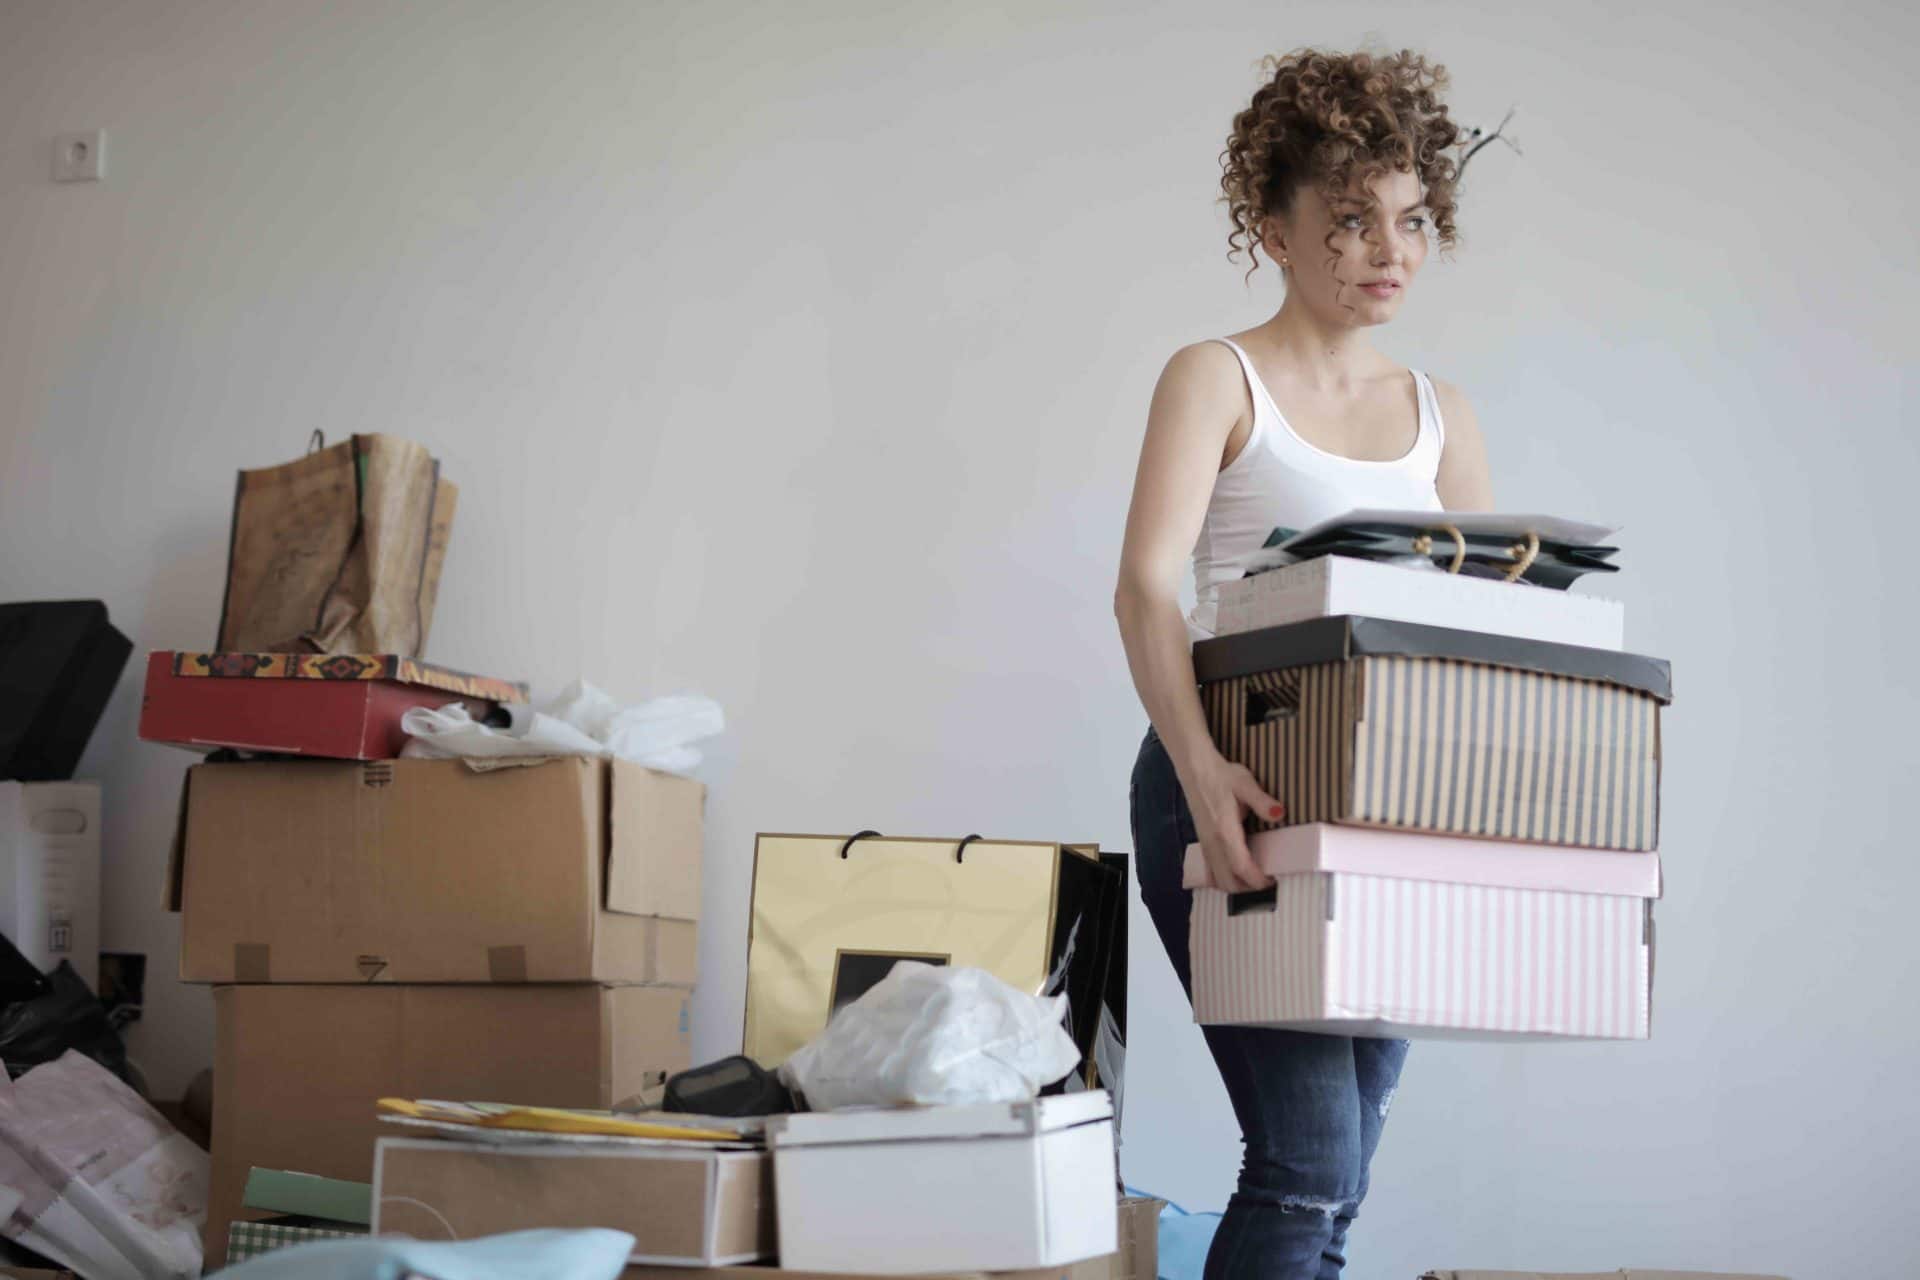 A woman gets rid of boxes of junk, showing how we could start dealing with consumerism